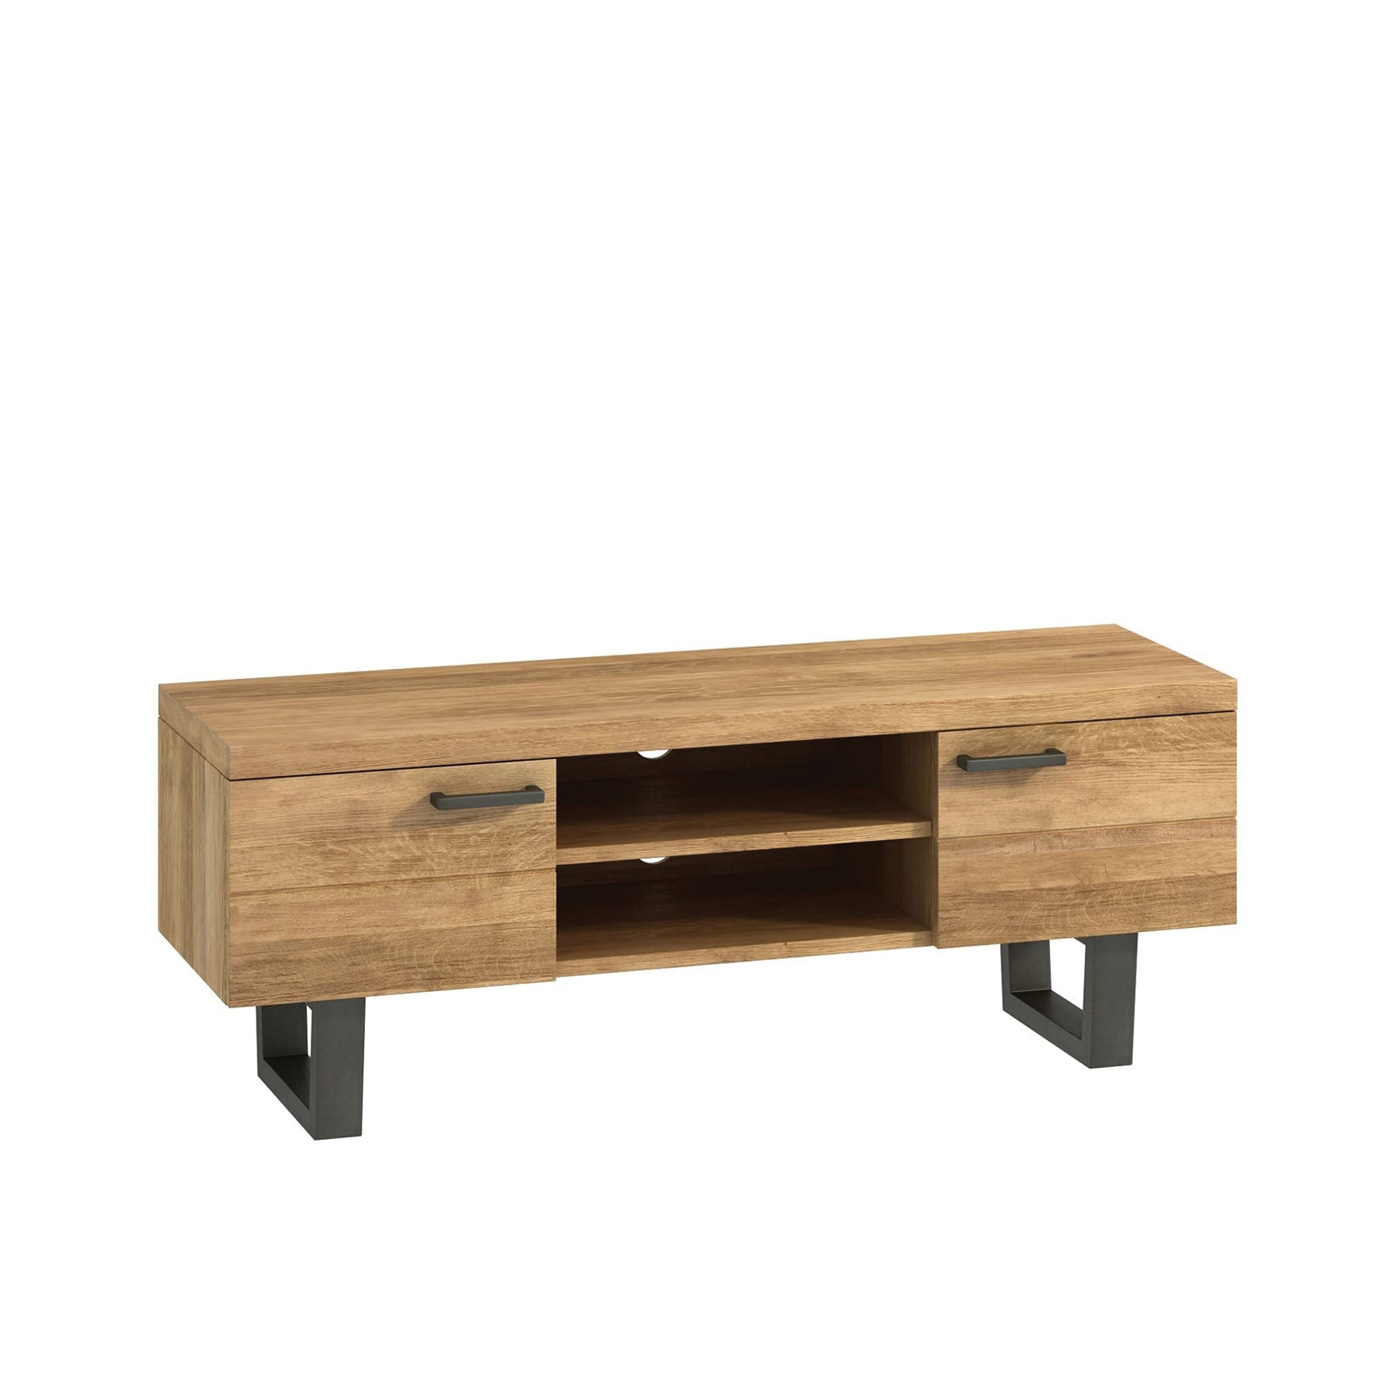 TV Units Of All shapes & Sizes - Shop Online Now